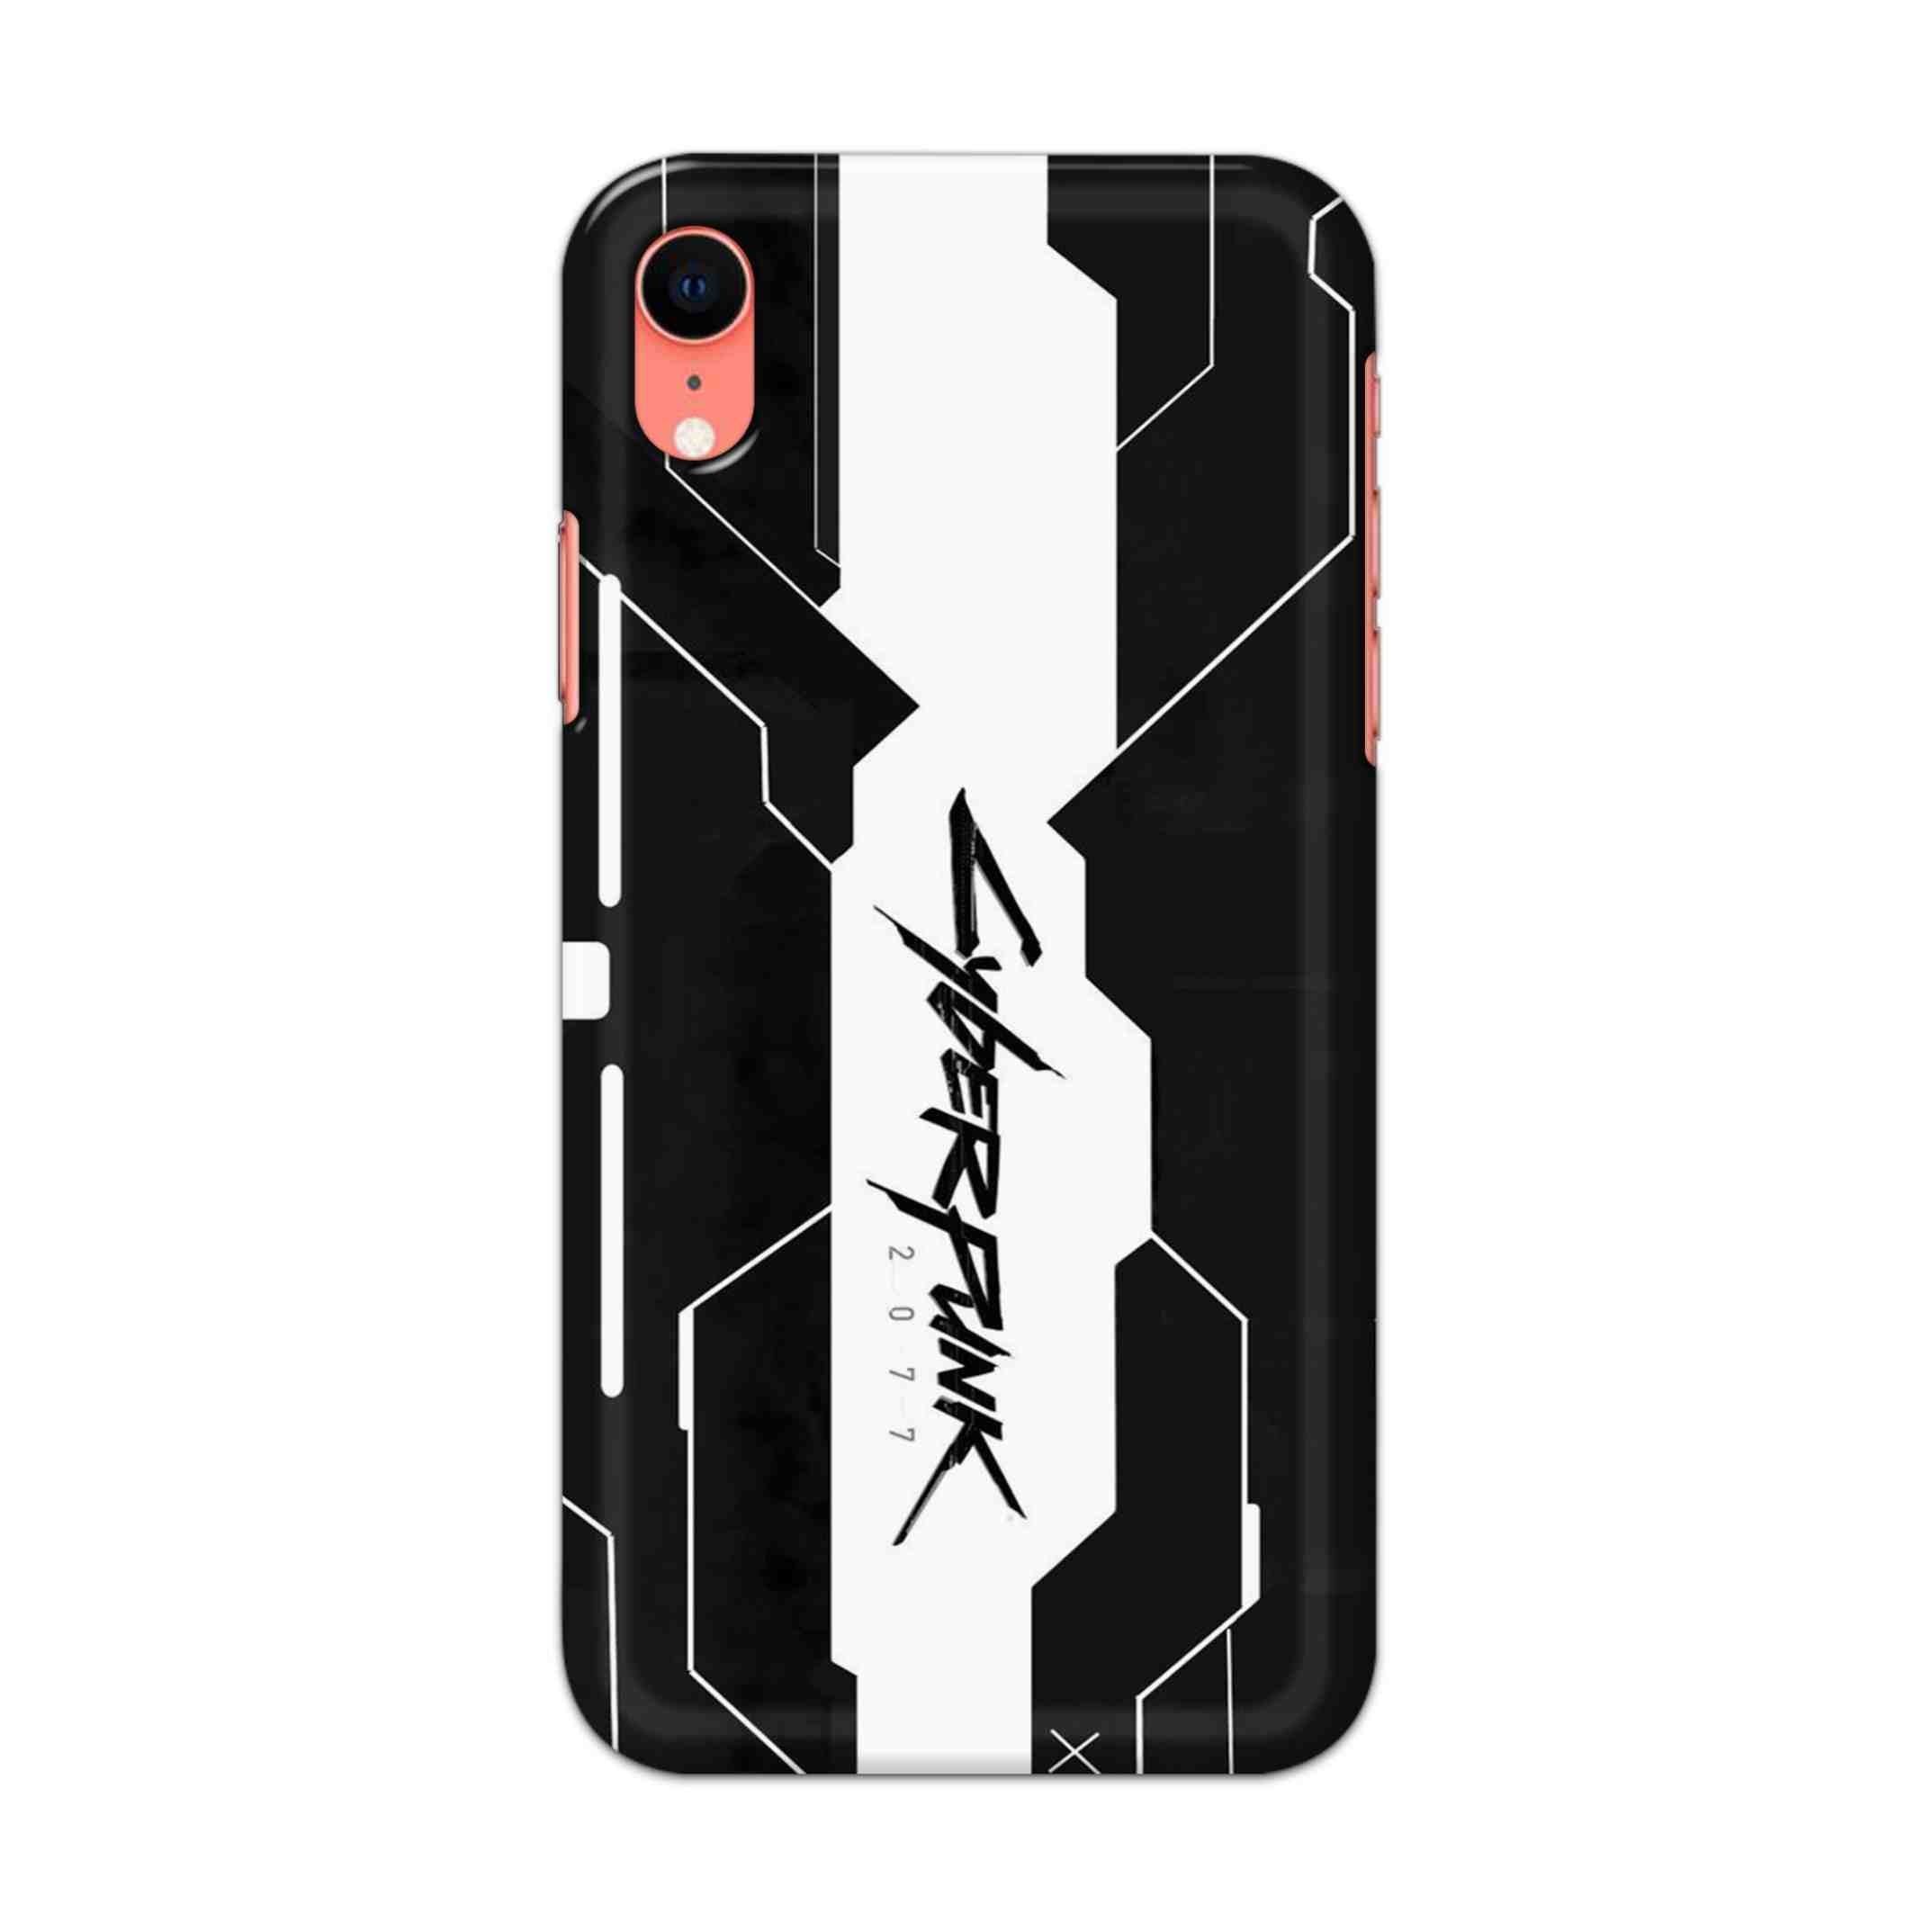 Buy Cyberpunk 2077 Art Hard Back Mobile Phone Case/Cover For iPhone XR Online